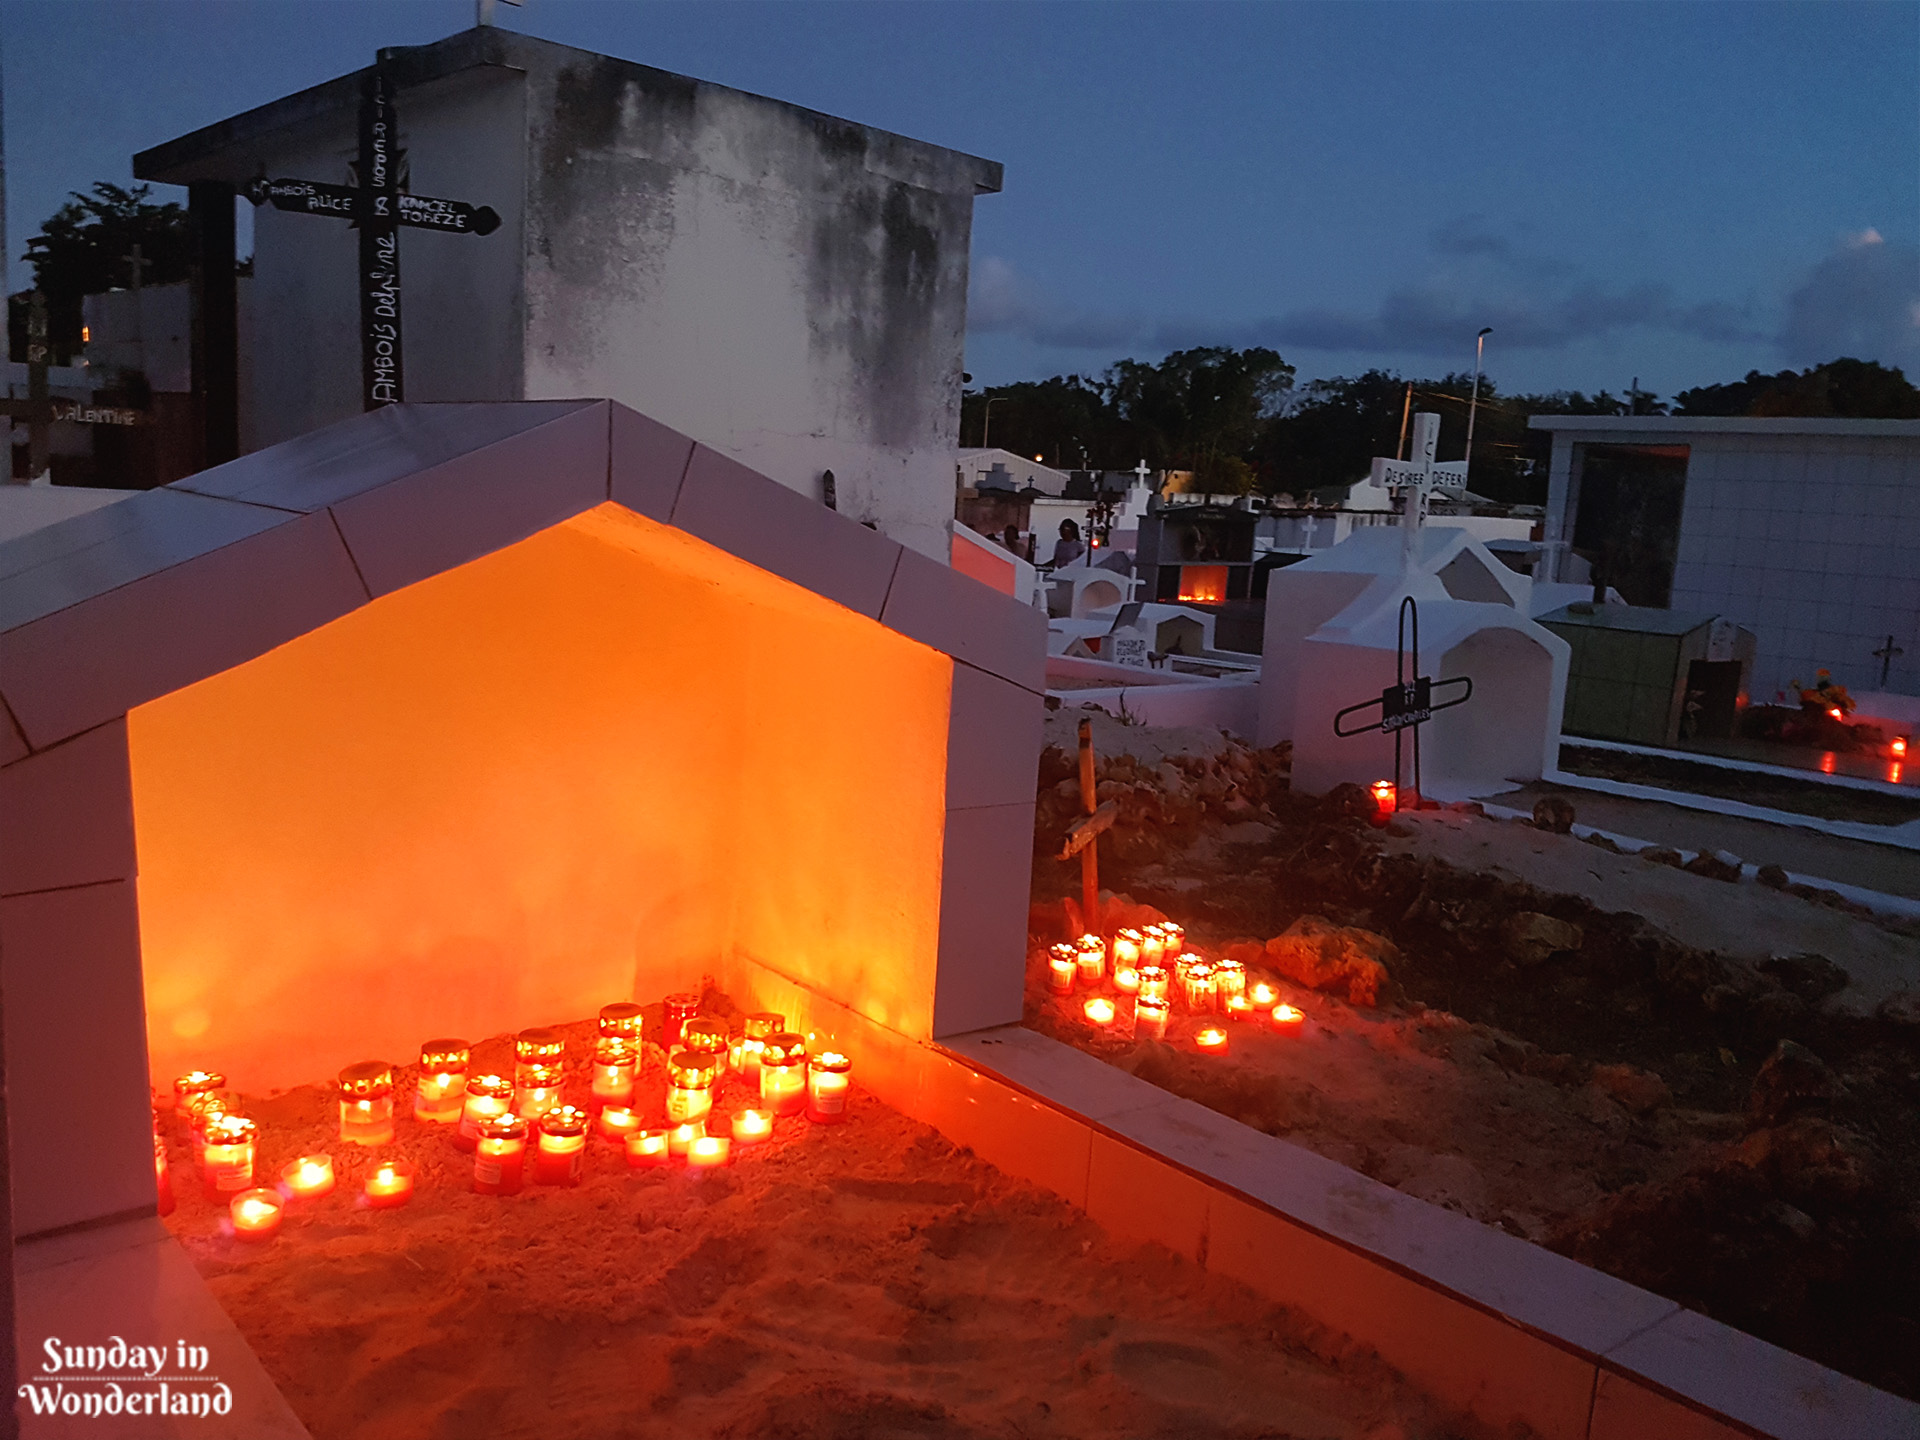 Antilles' cemetery becoming magical after dusk - Sunday in Wonderland Blog